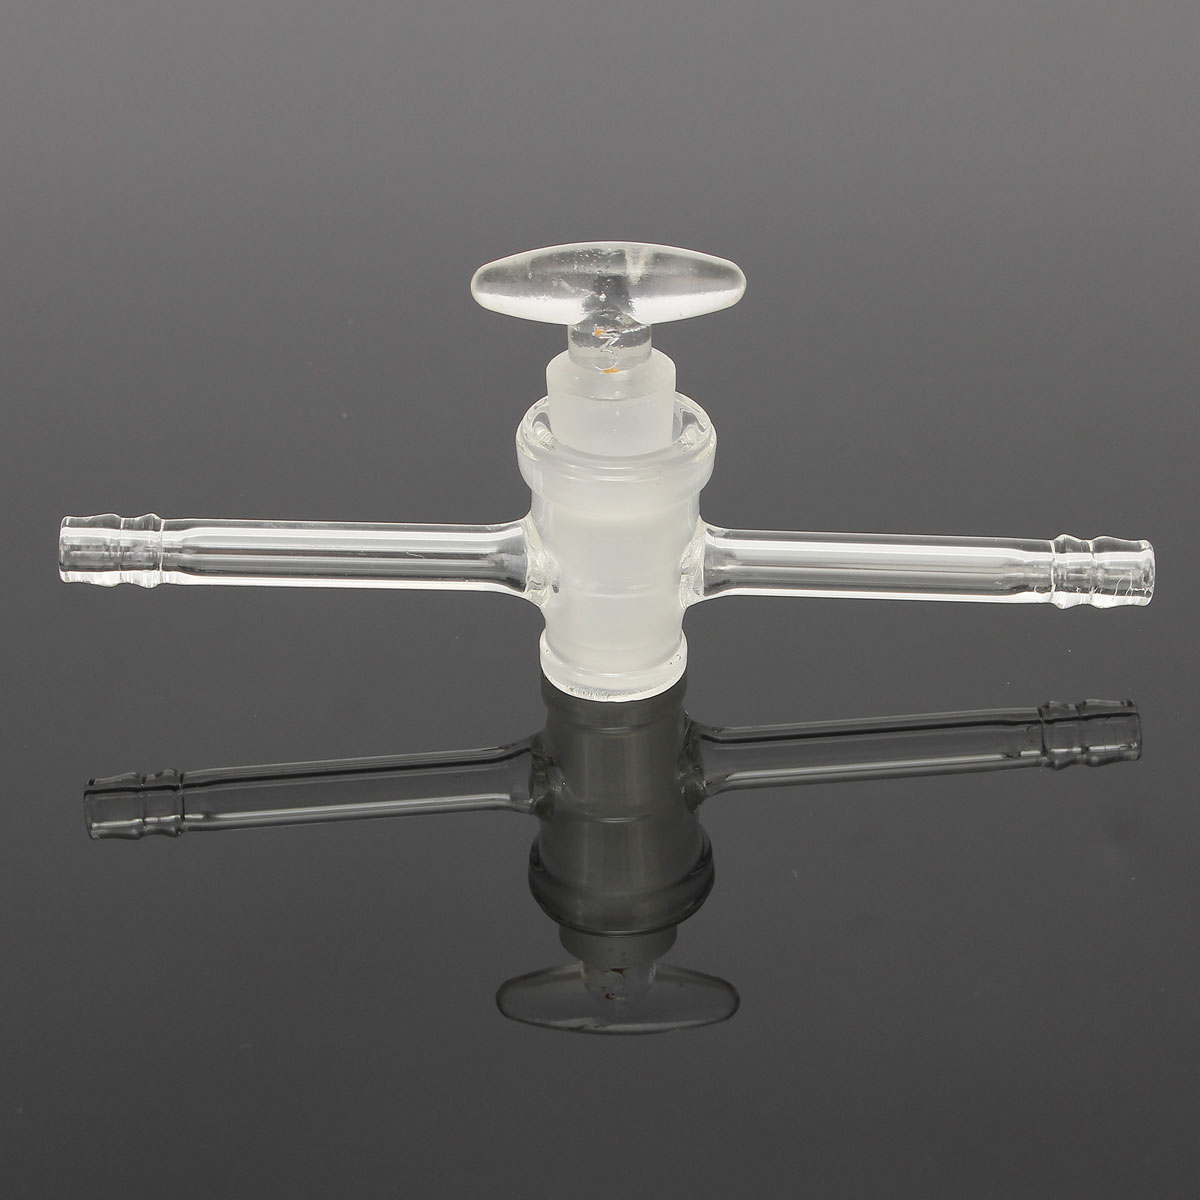 Straight-Adapter-with-Glass-Stopcock-Hose-Connection-Glass-Valve-Lab-Glass-Stopcock-Chemical-Valve-1634207